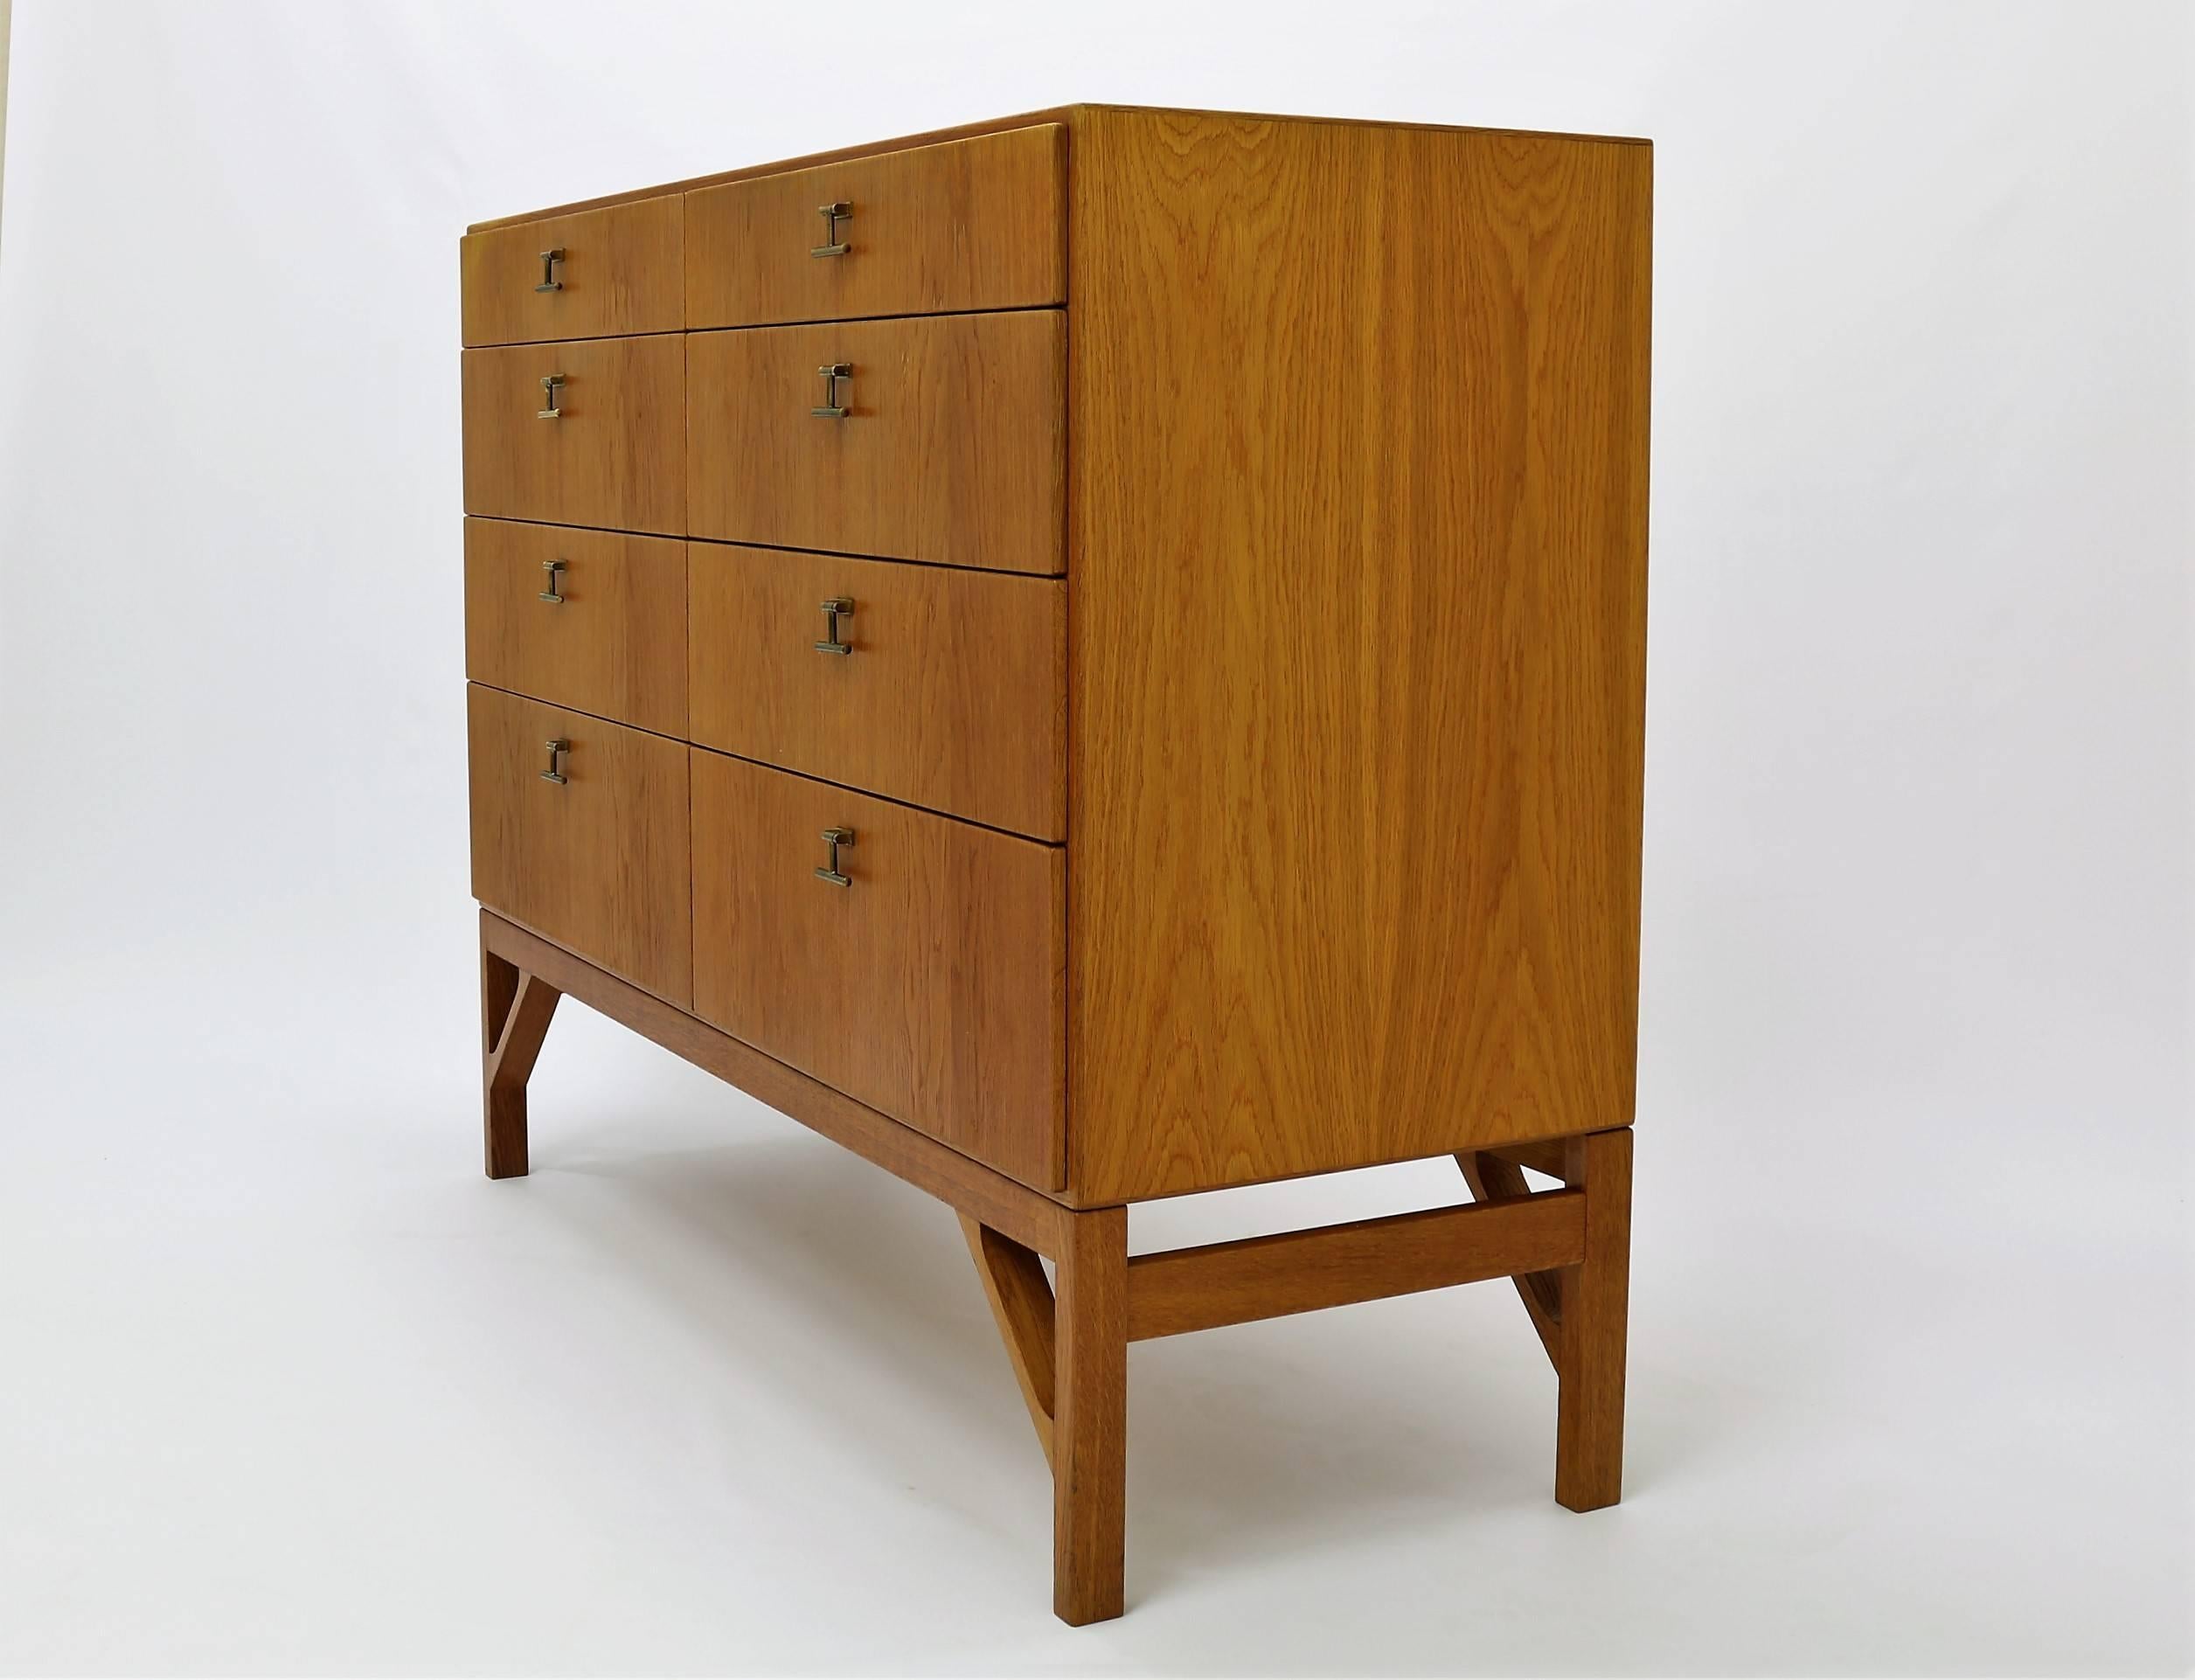 This great chest of drawers was designed by Børge Mogensen for FDB Furniture in the 1950s and manufactured by furniture maker C.M. Madsen / Denmark, Model no. A 234. It features a solid oak base with an oak cabinet and eight spacious drawers with